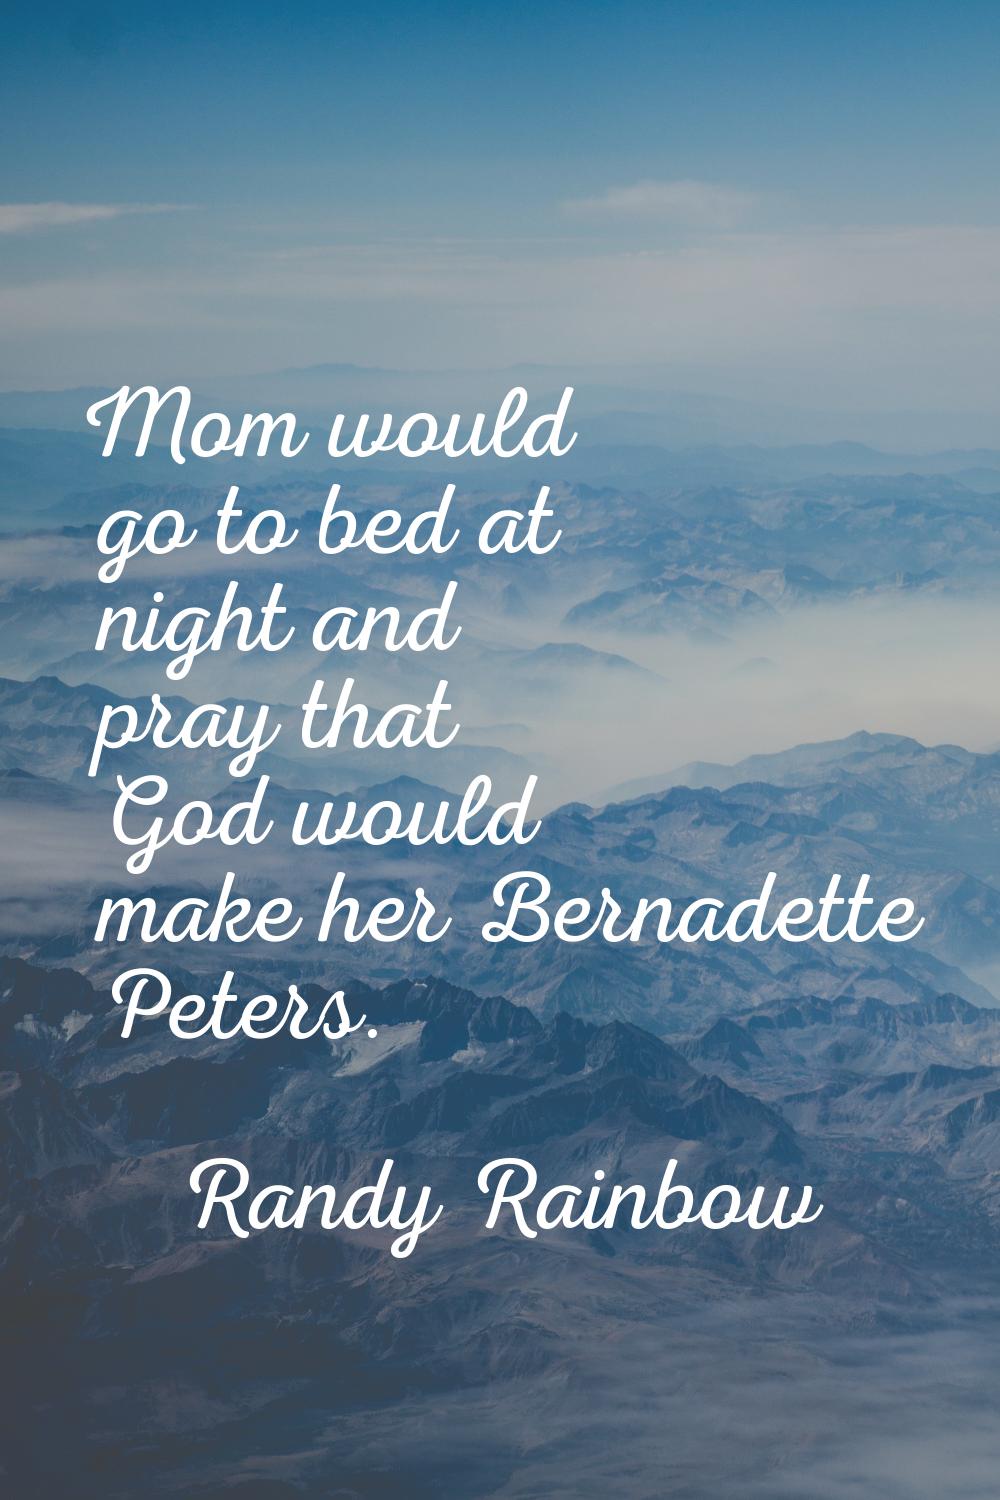 Mom would go to bed at night and pray that God would make her Bernadette Peters.